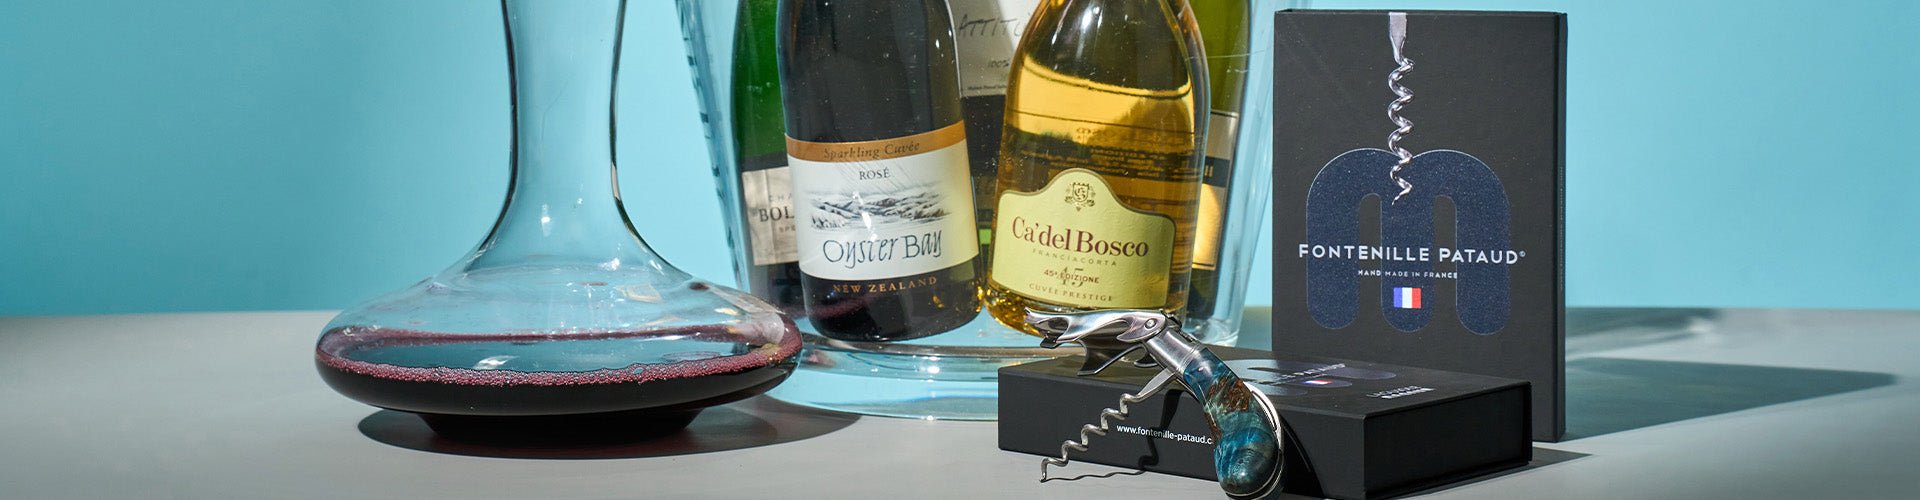 A wide range of wine and beverage accessories from bottle openers to dispensers, corkscrew, wine chillers and glassware.